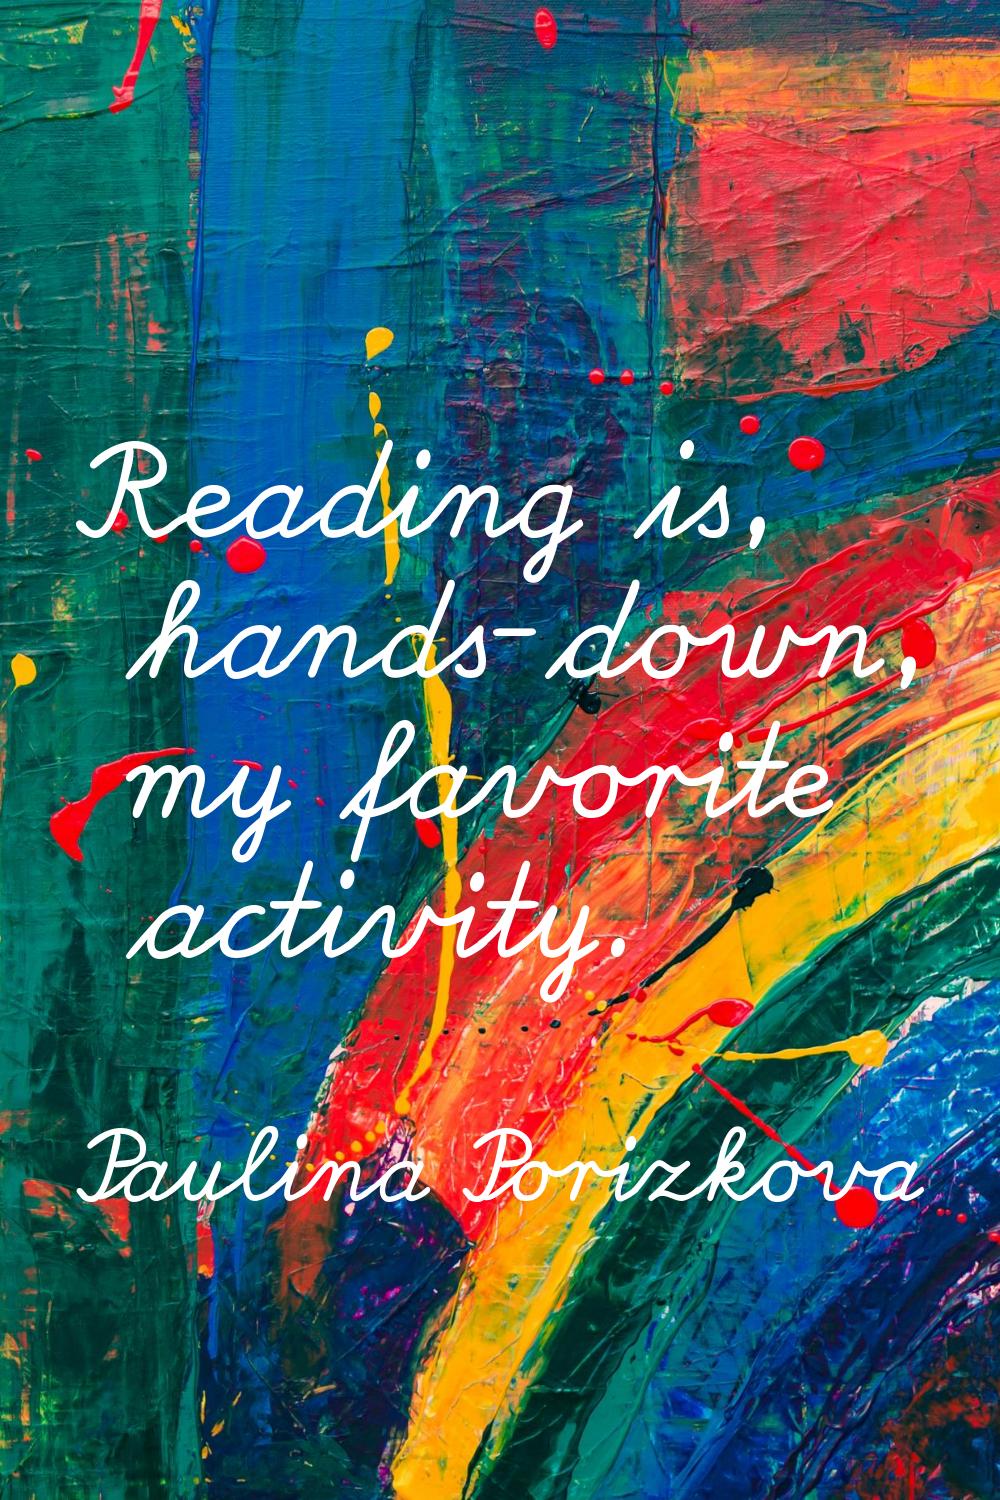 Reading is, hands-down, my favorite activity.